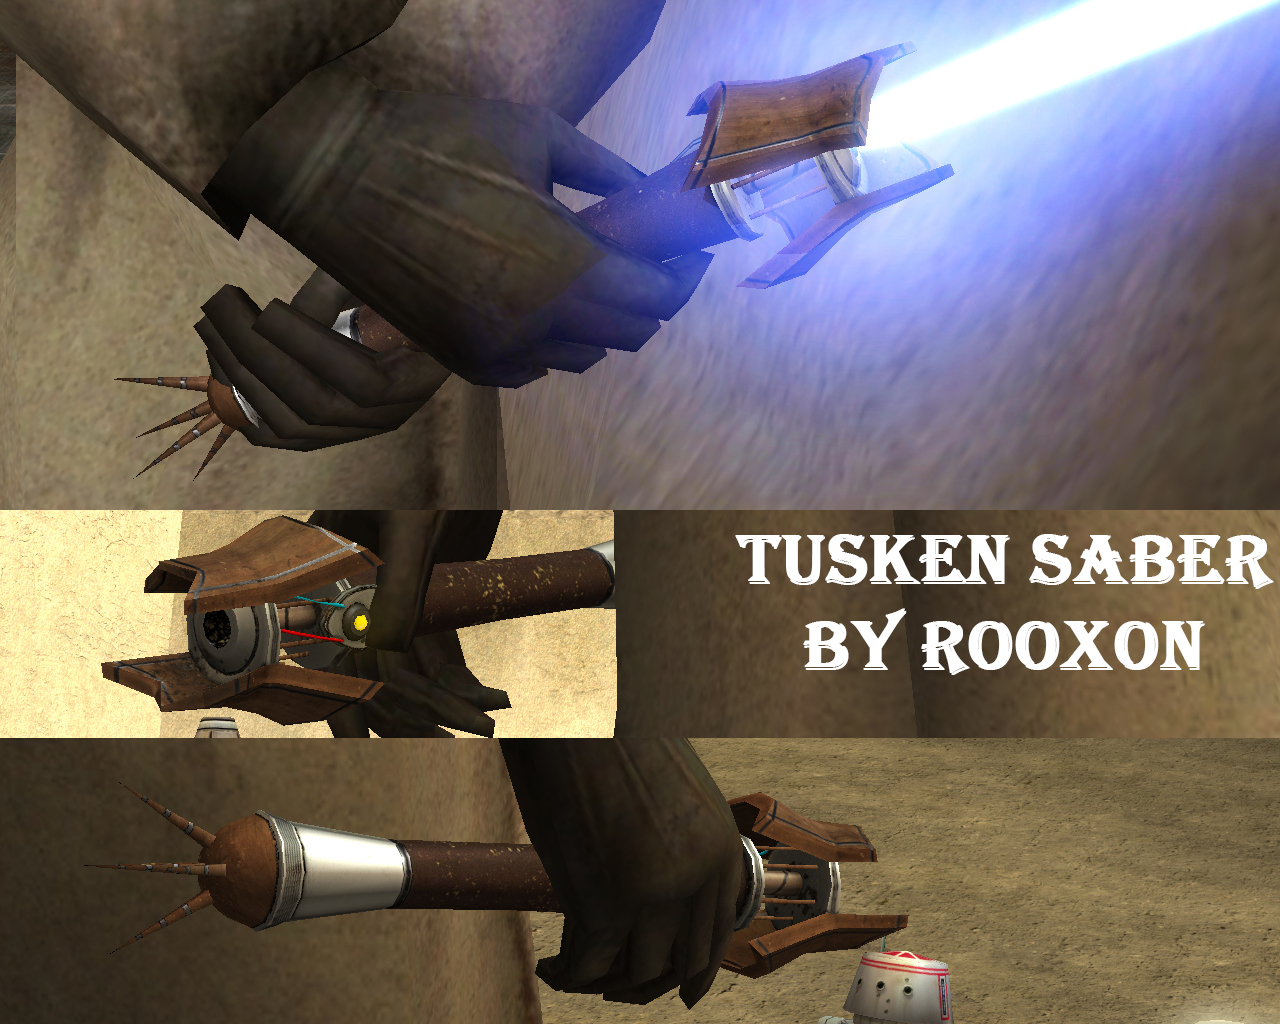 More information about "Tusken Saber"